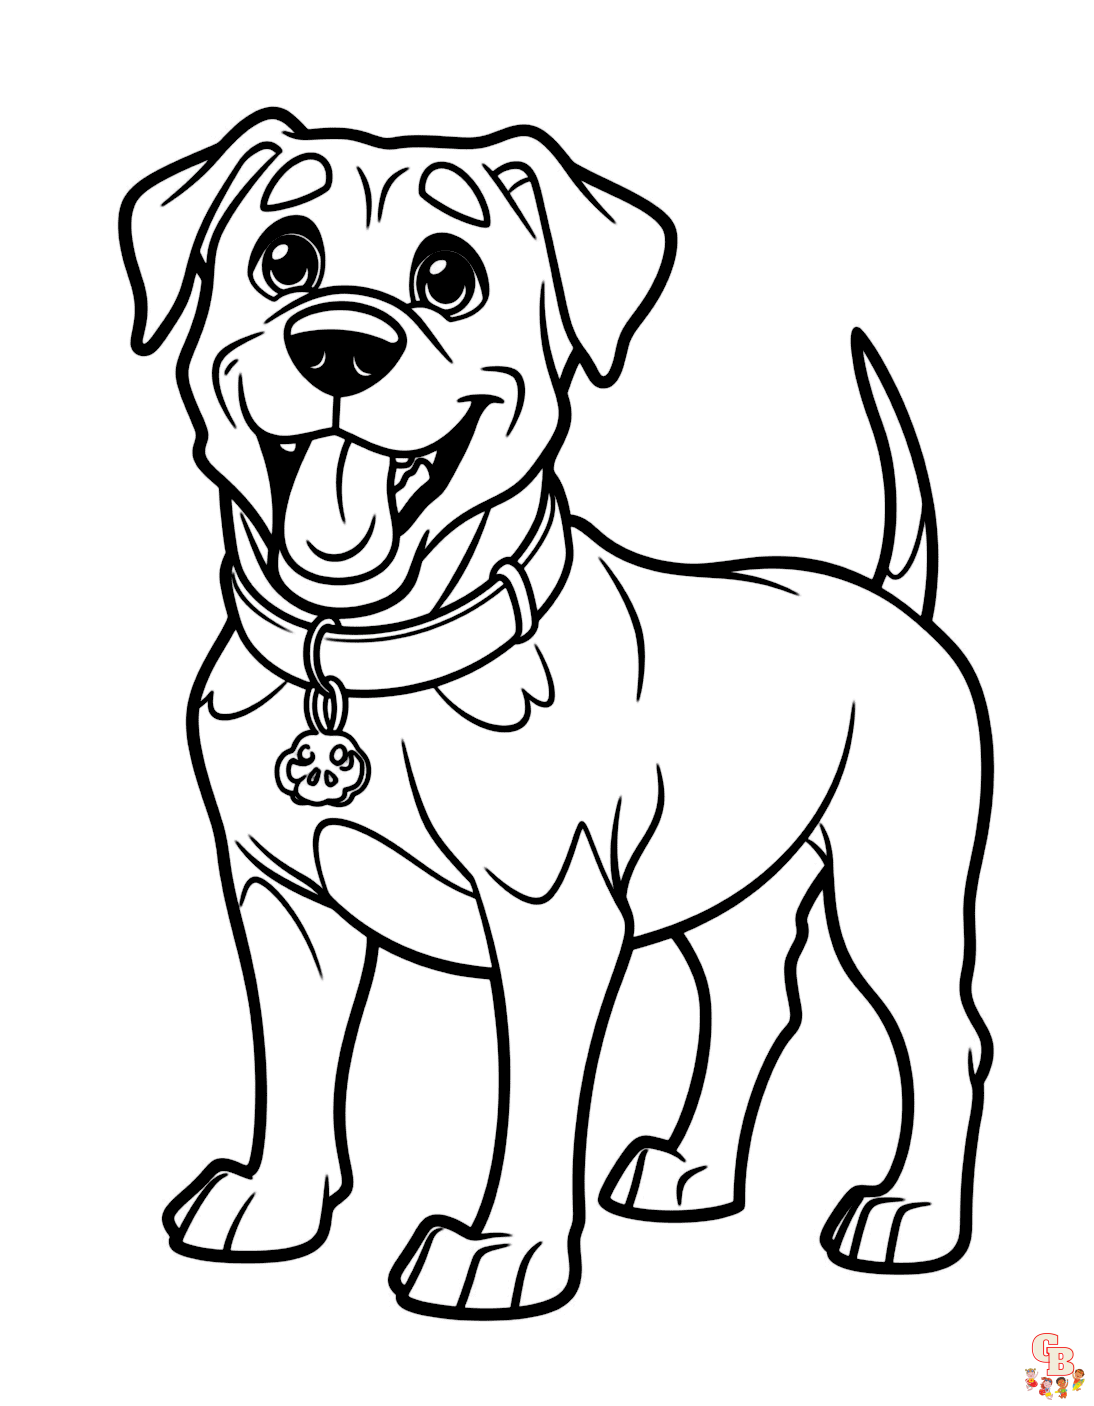 Rottweiler coloring pages to print